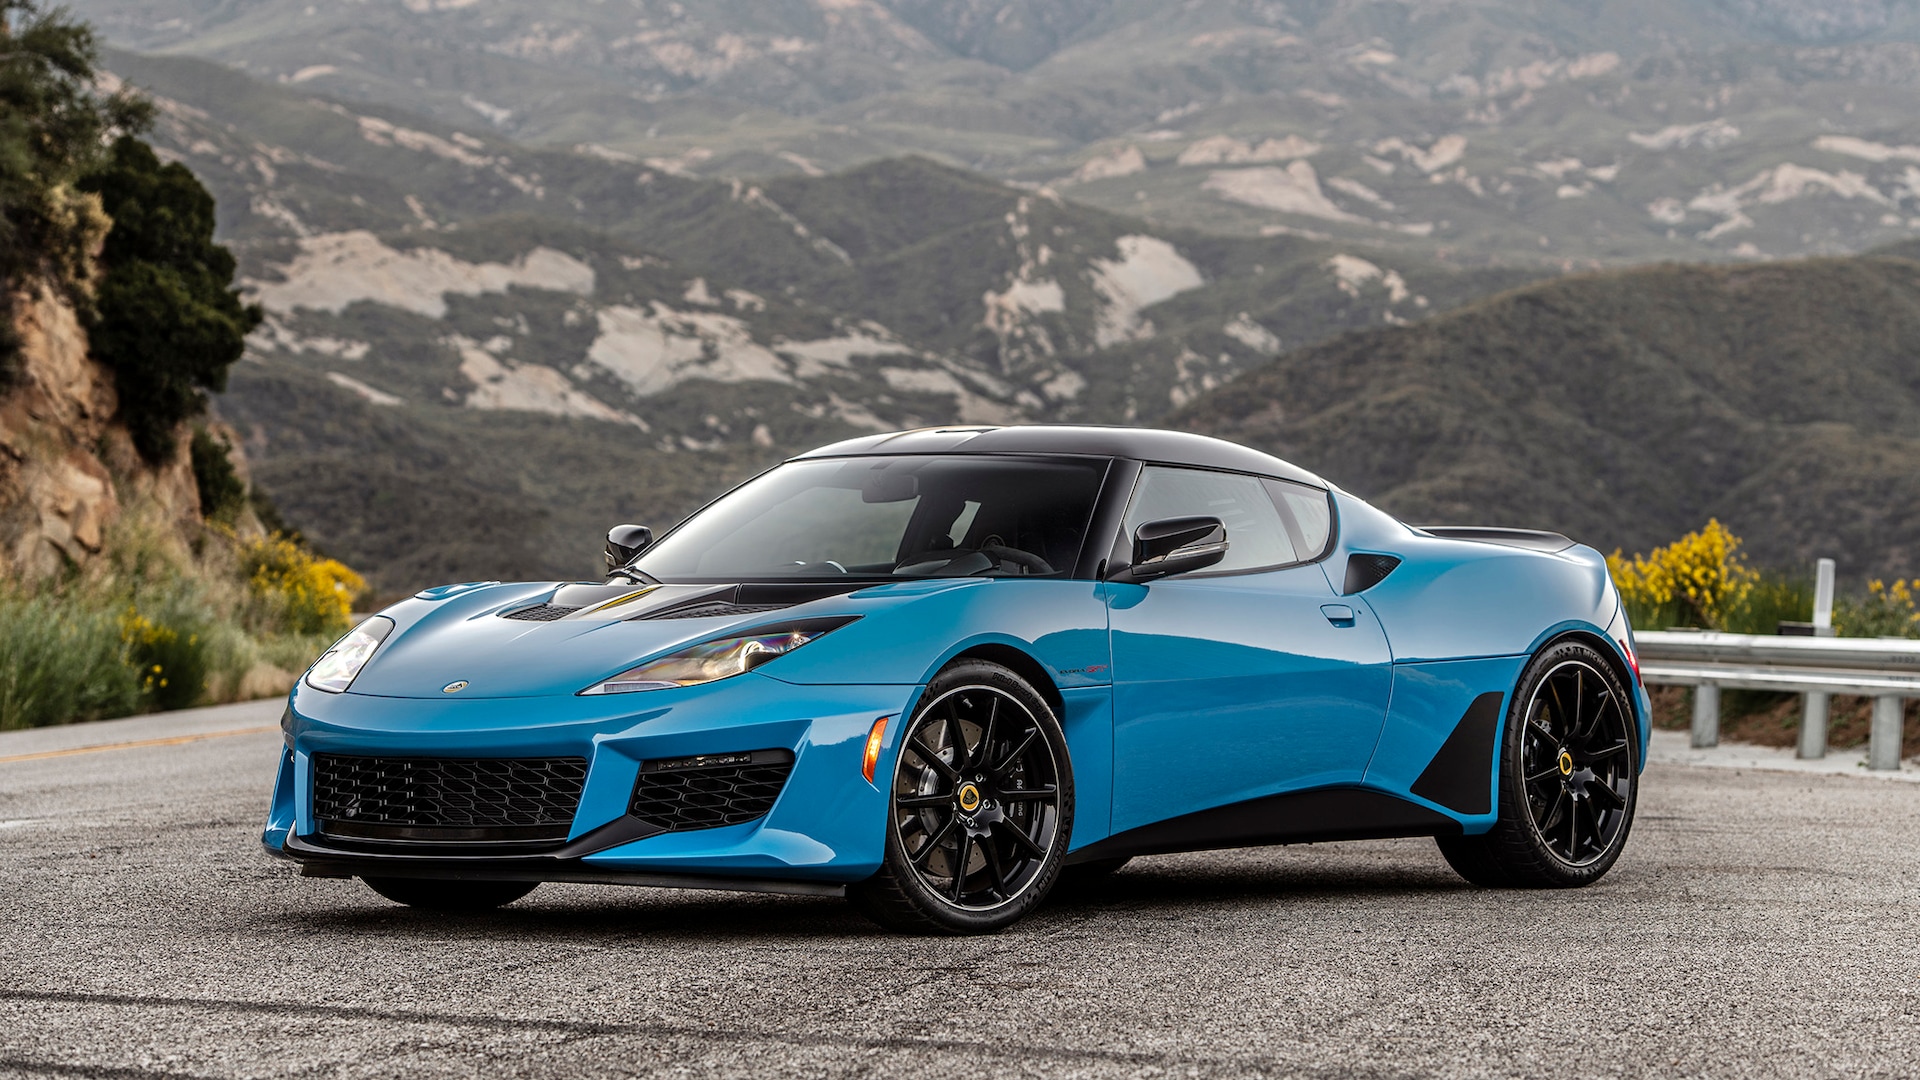 Lotus Kills the Exige, Evora, and Elise so Its New Sports Cars Can Live